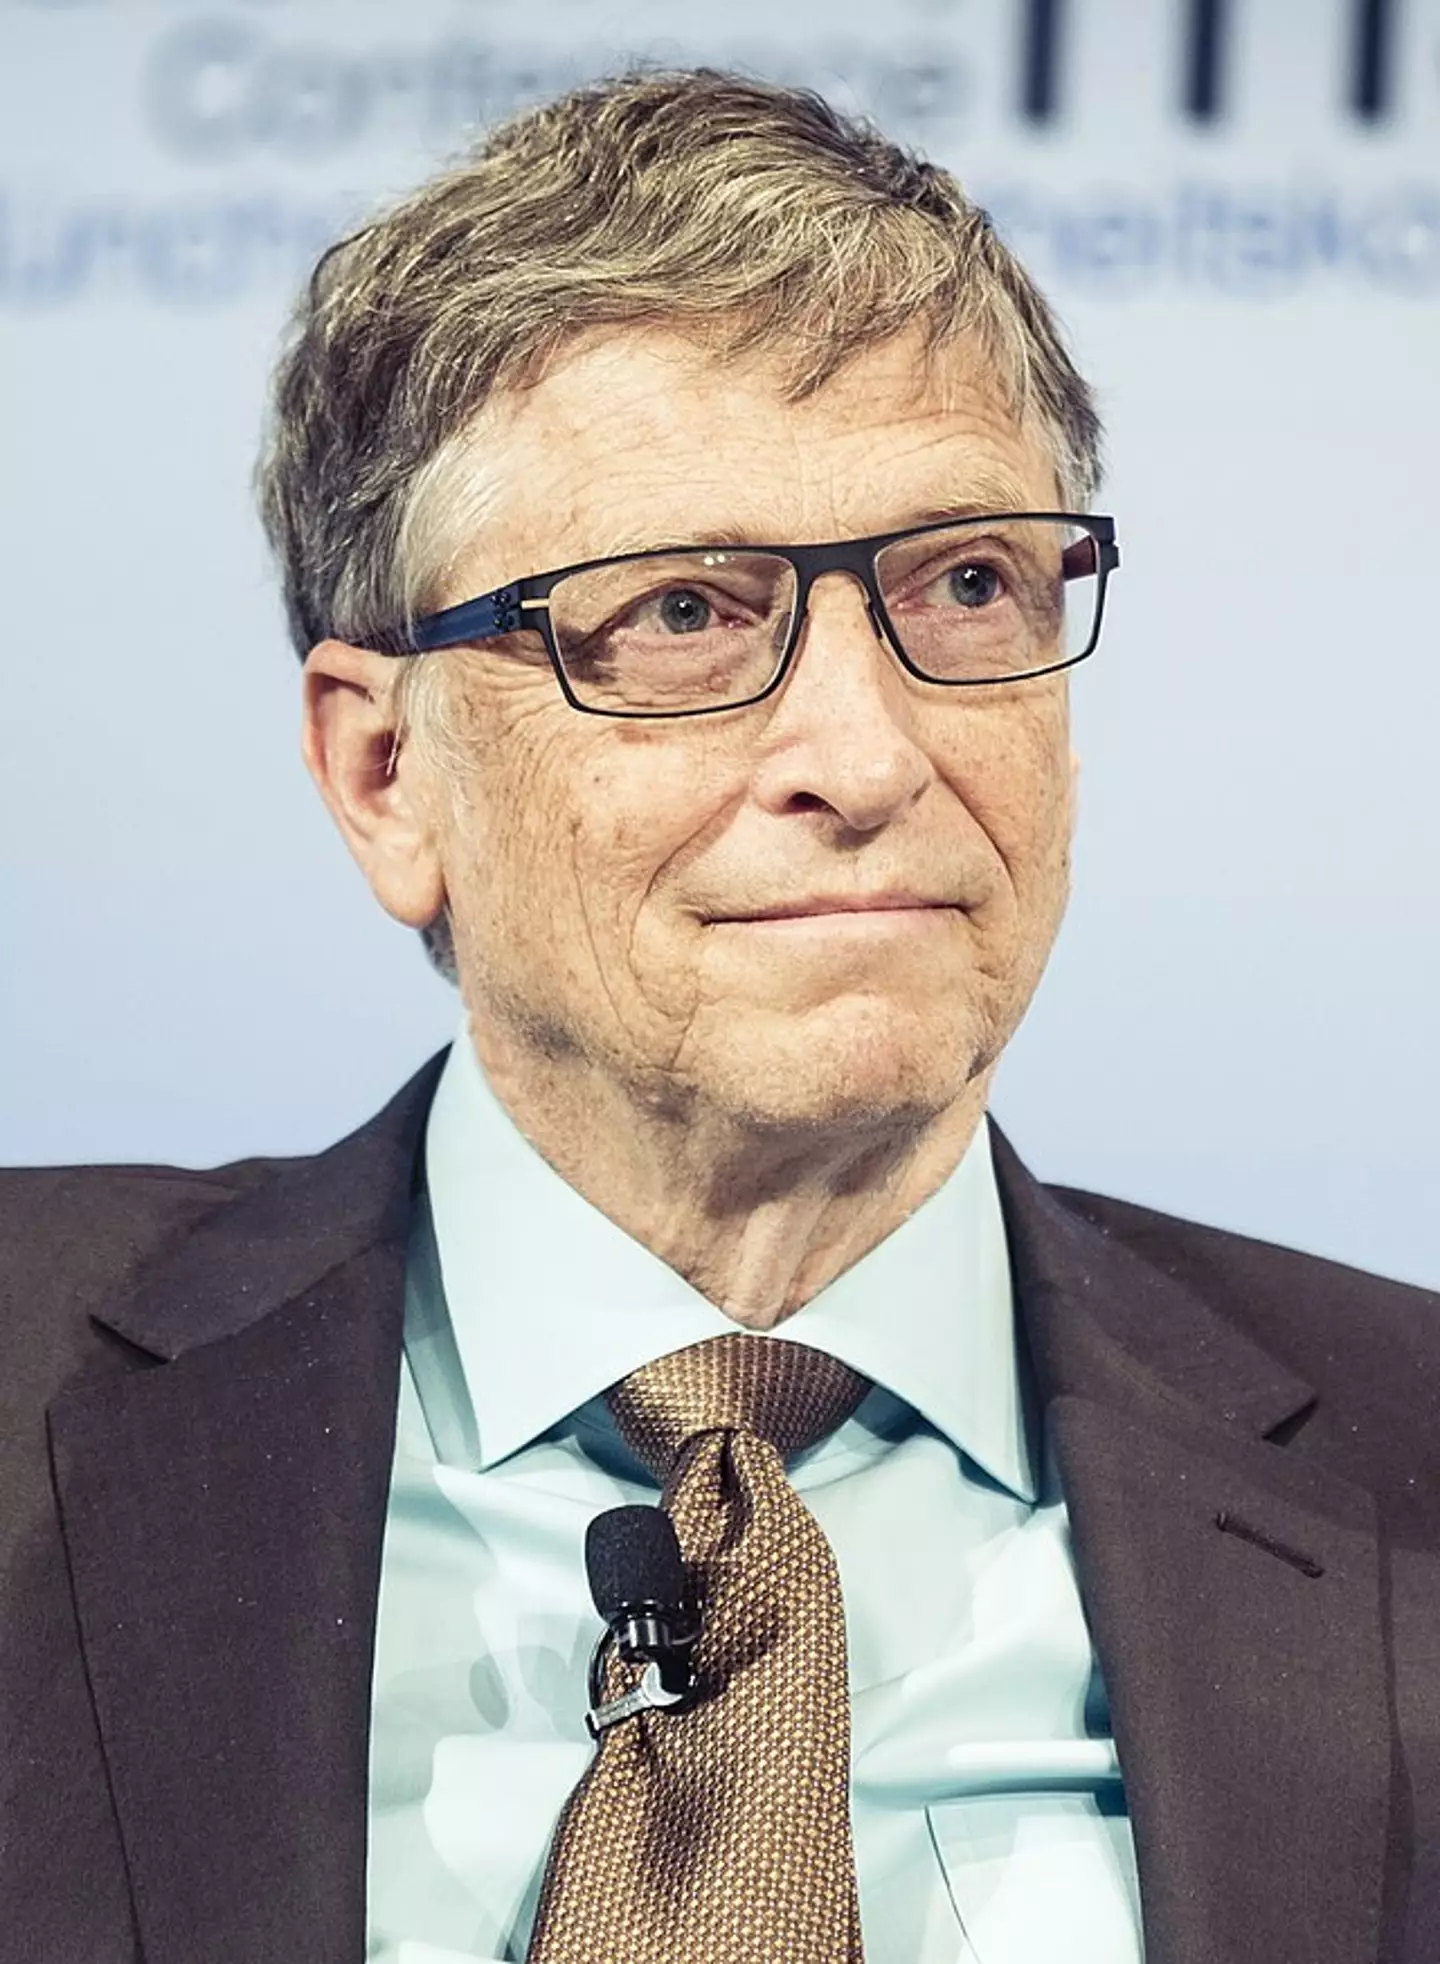 Bill Gates has revealed the one thing he'd change about Microsoft in hindsight.